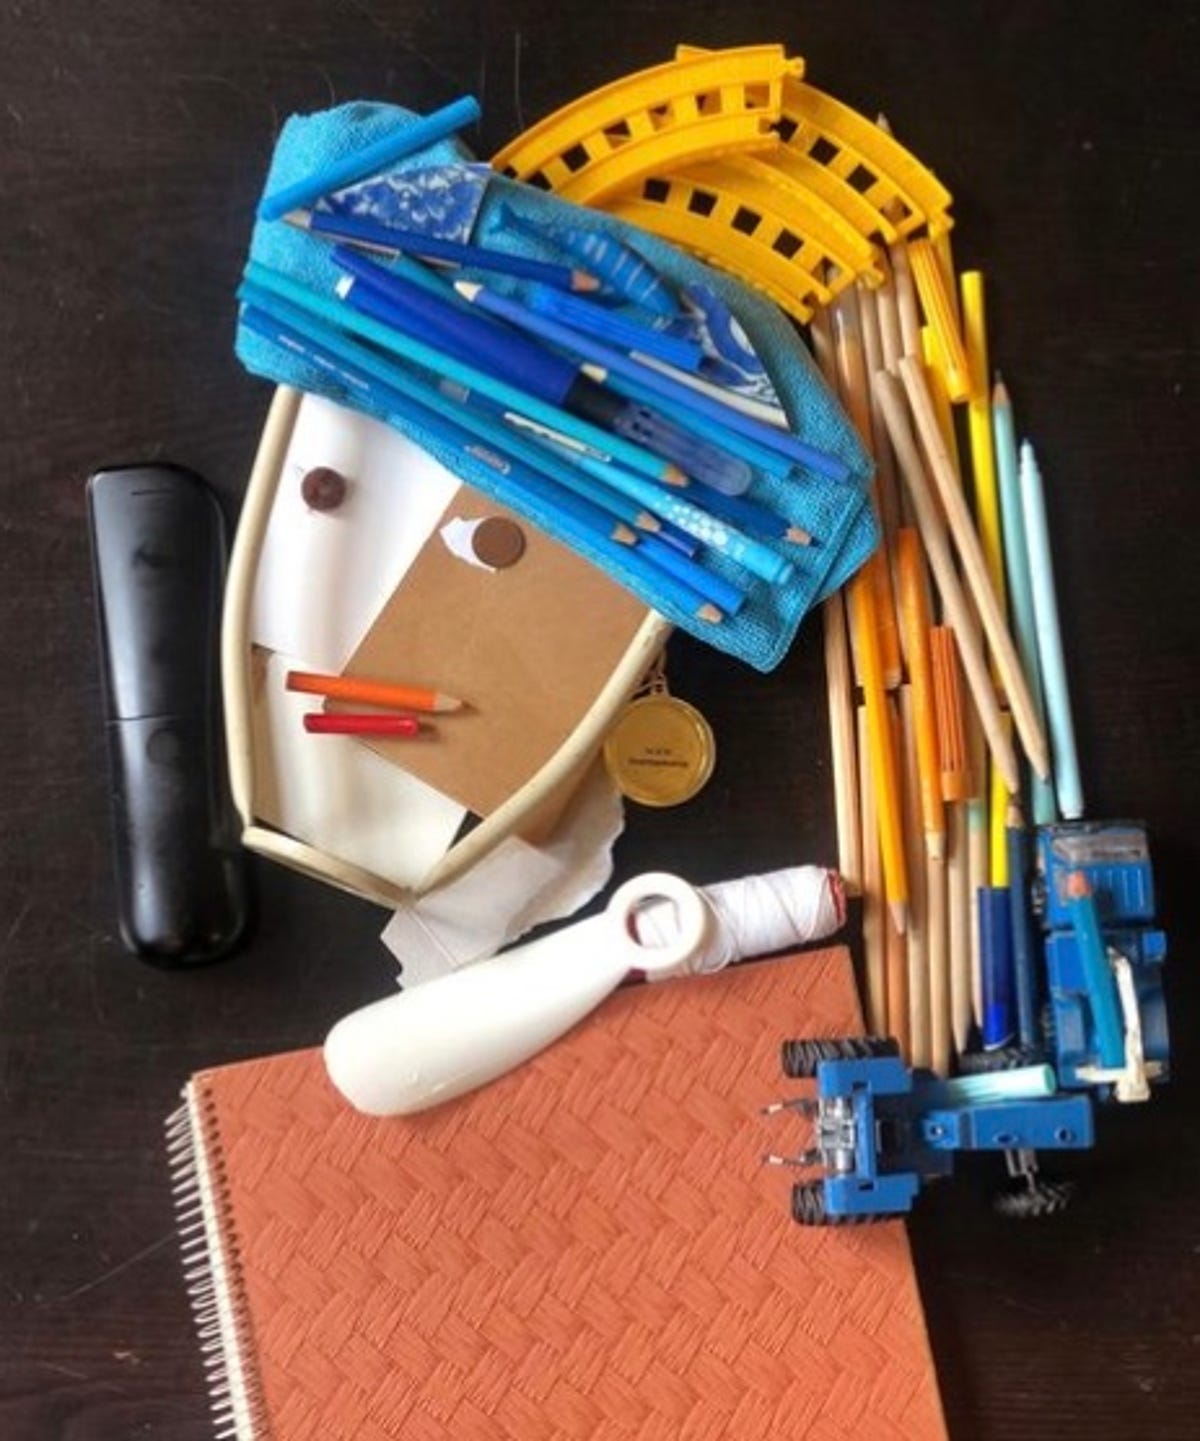 Pencils and other school supplies shaped like Girl with a Pearl Earring